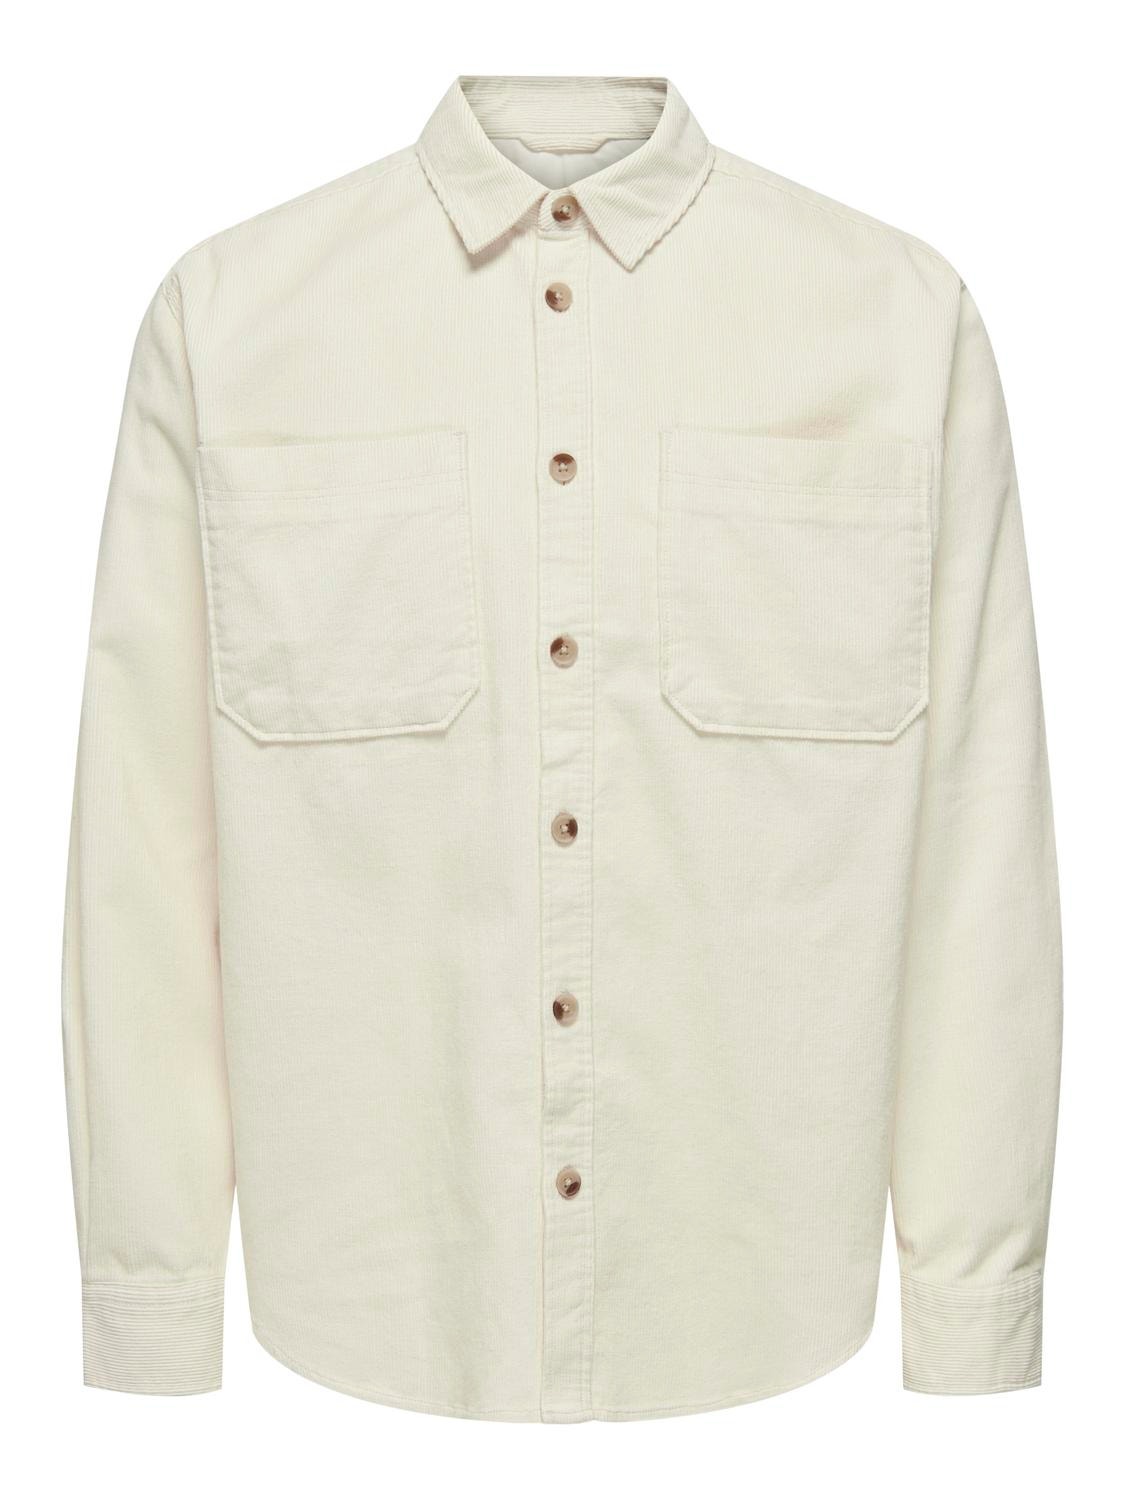 ONLY & SONS Solid colored Corduroy shirt -Cloud Dancer - 22024716